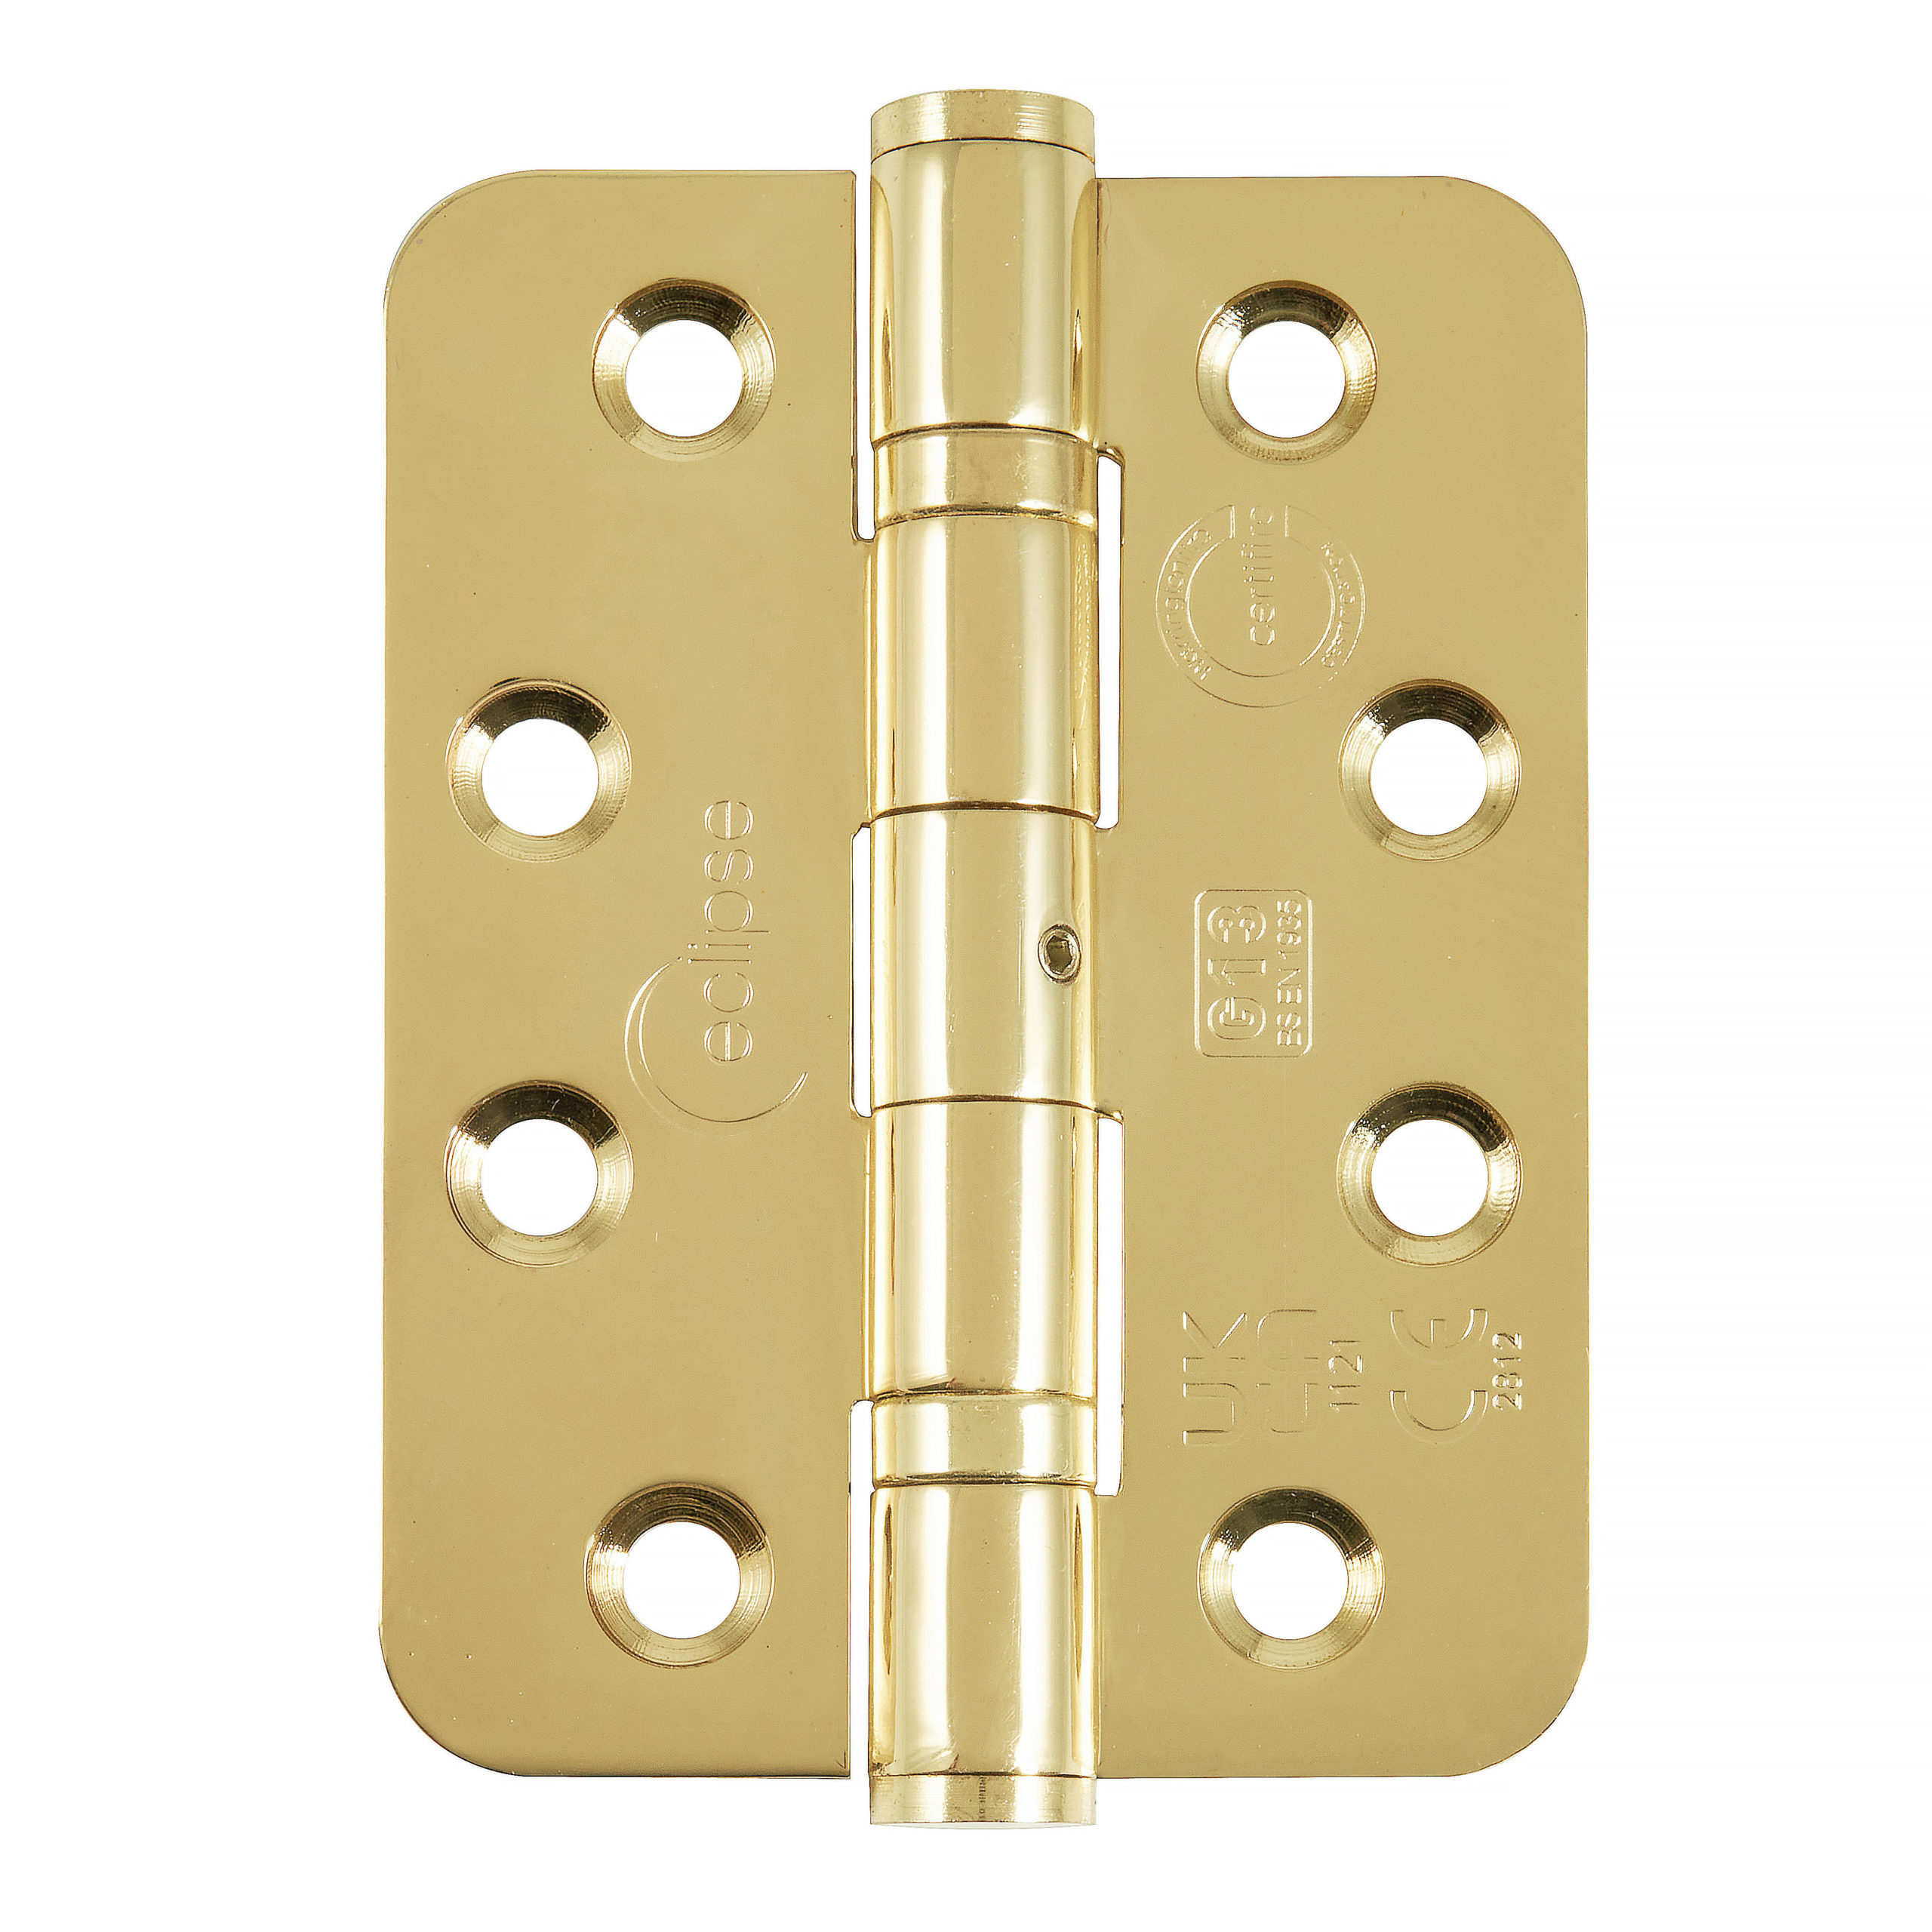 Eclipse 4 inch (102mm) Ball Bearing Hinge Grade 13 Radius Ends - Polished Brass (Pack of 3)